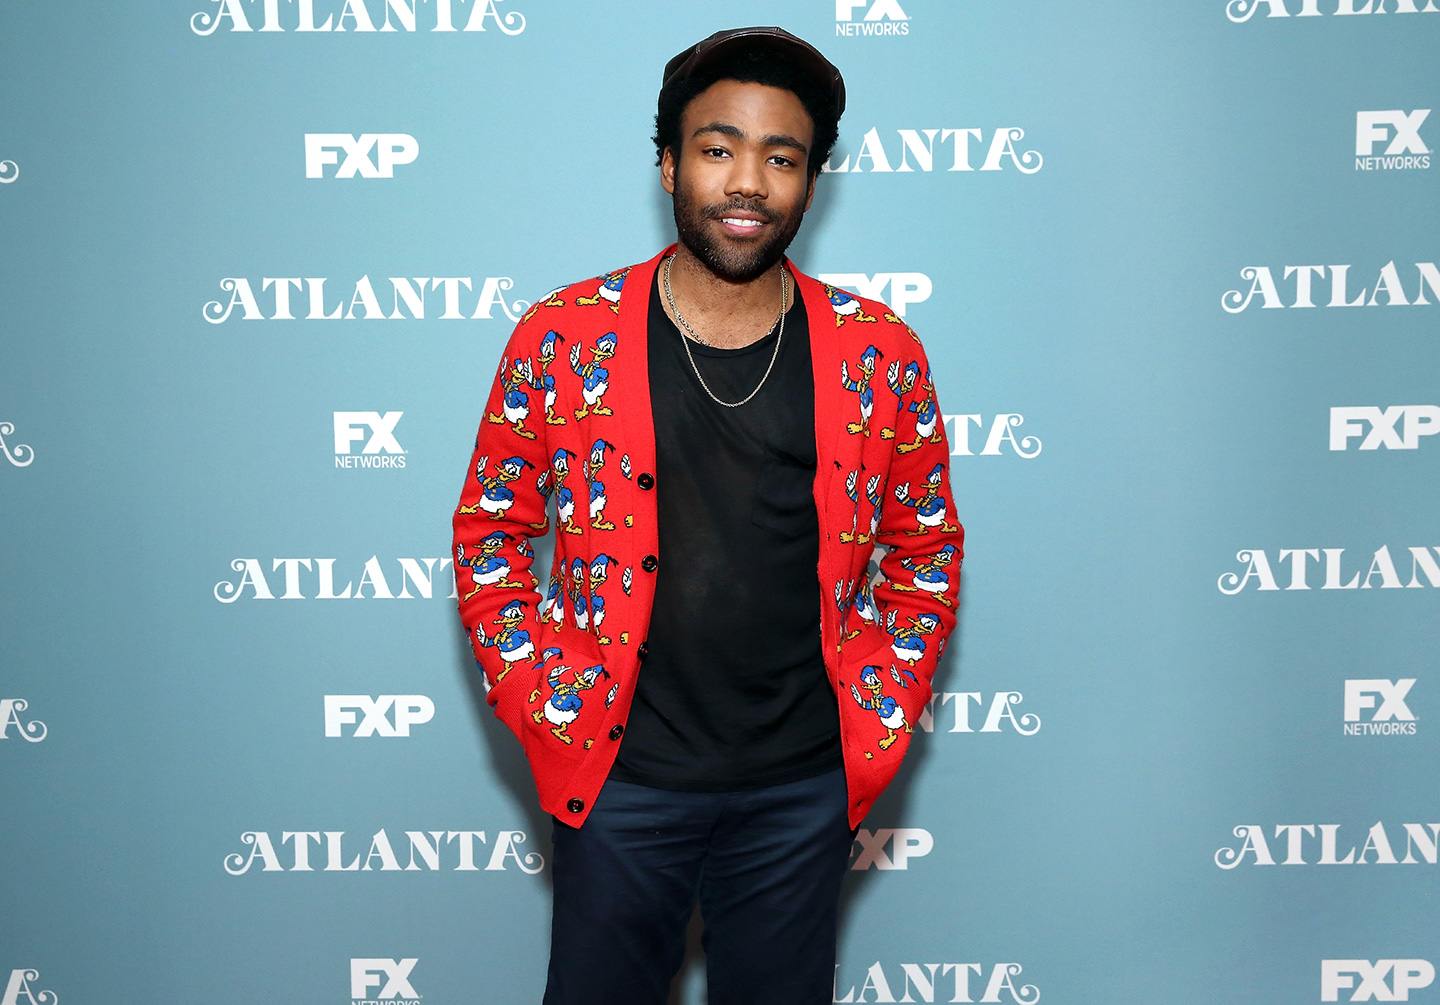 Ron Howard Shares First Photo of Donald Glover as Lando Calrissian